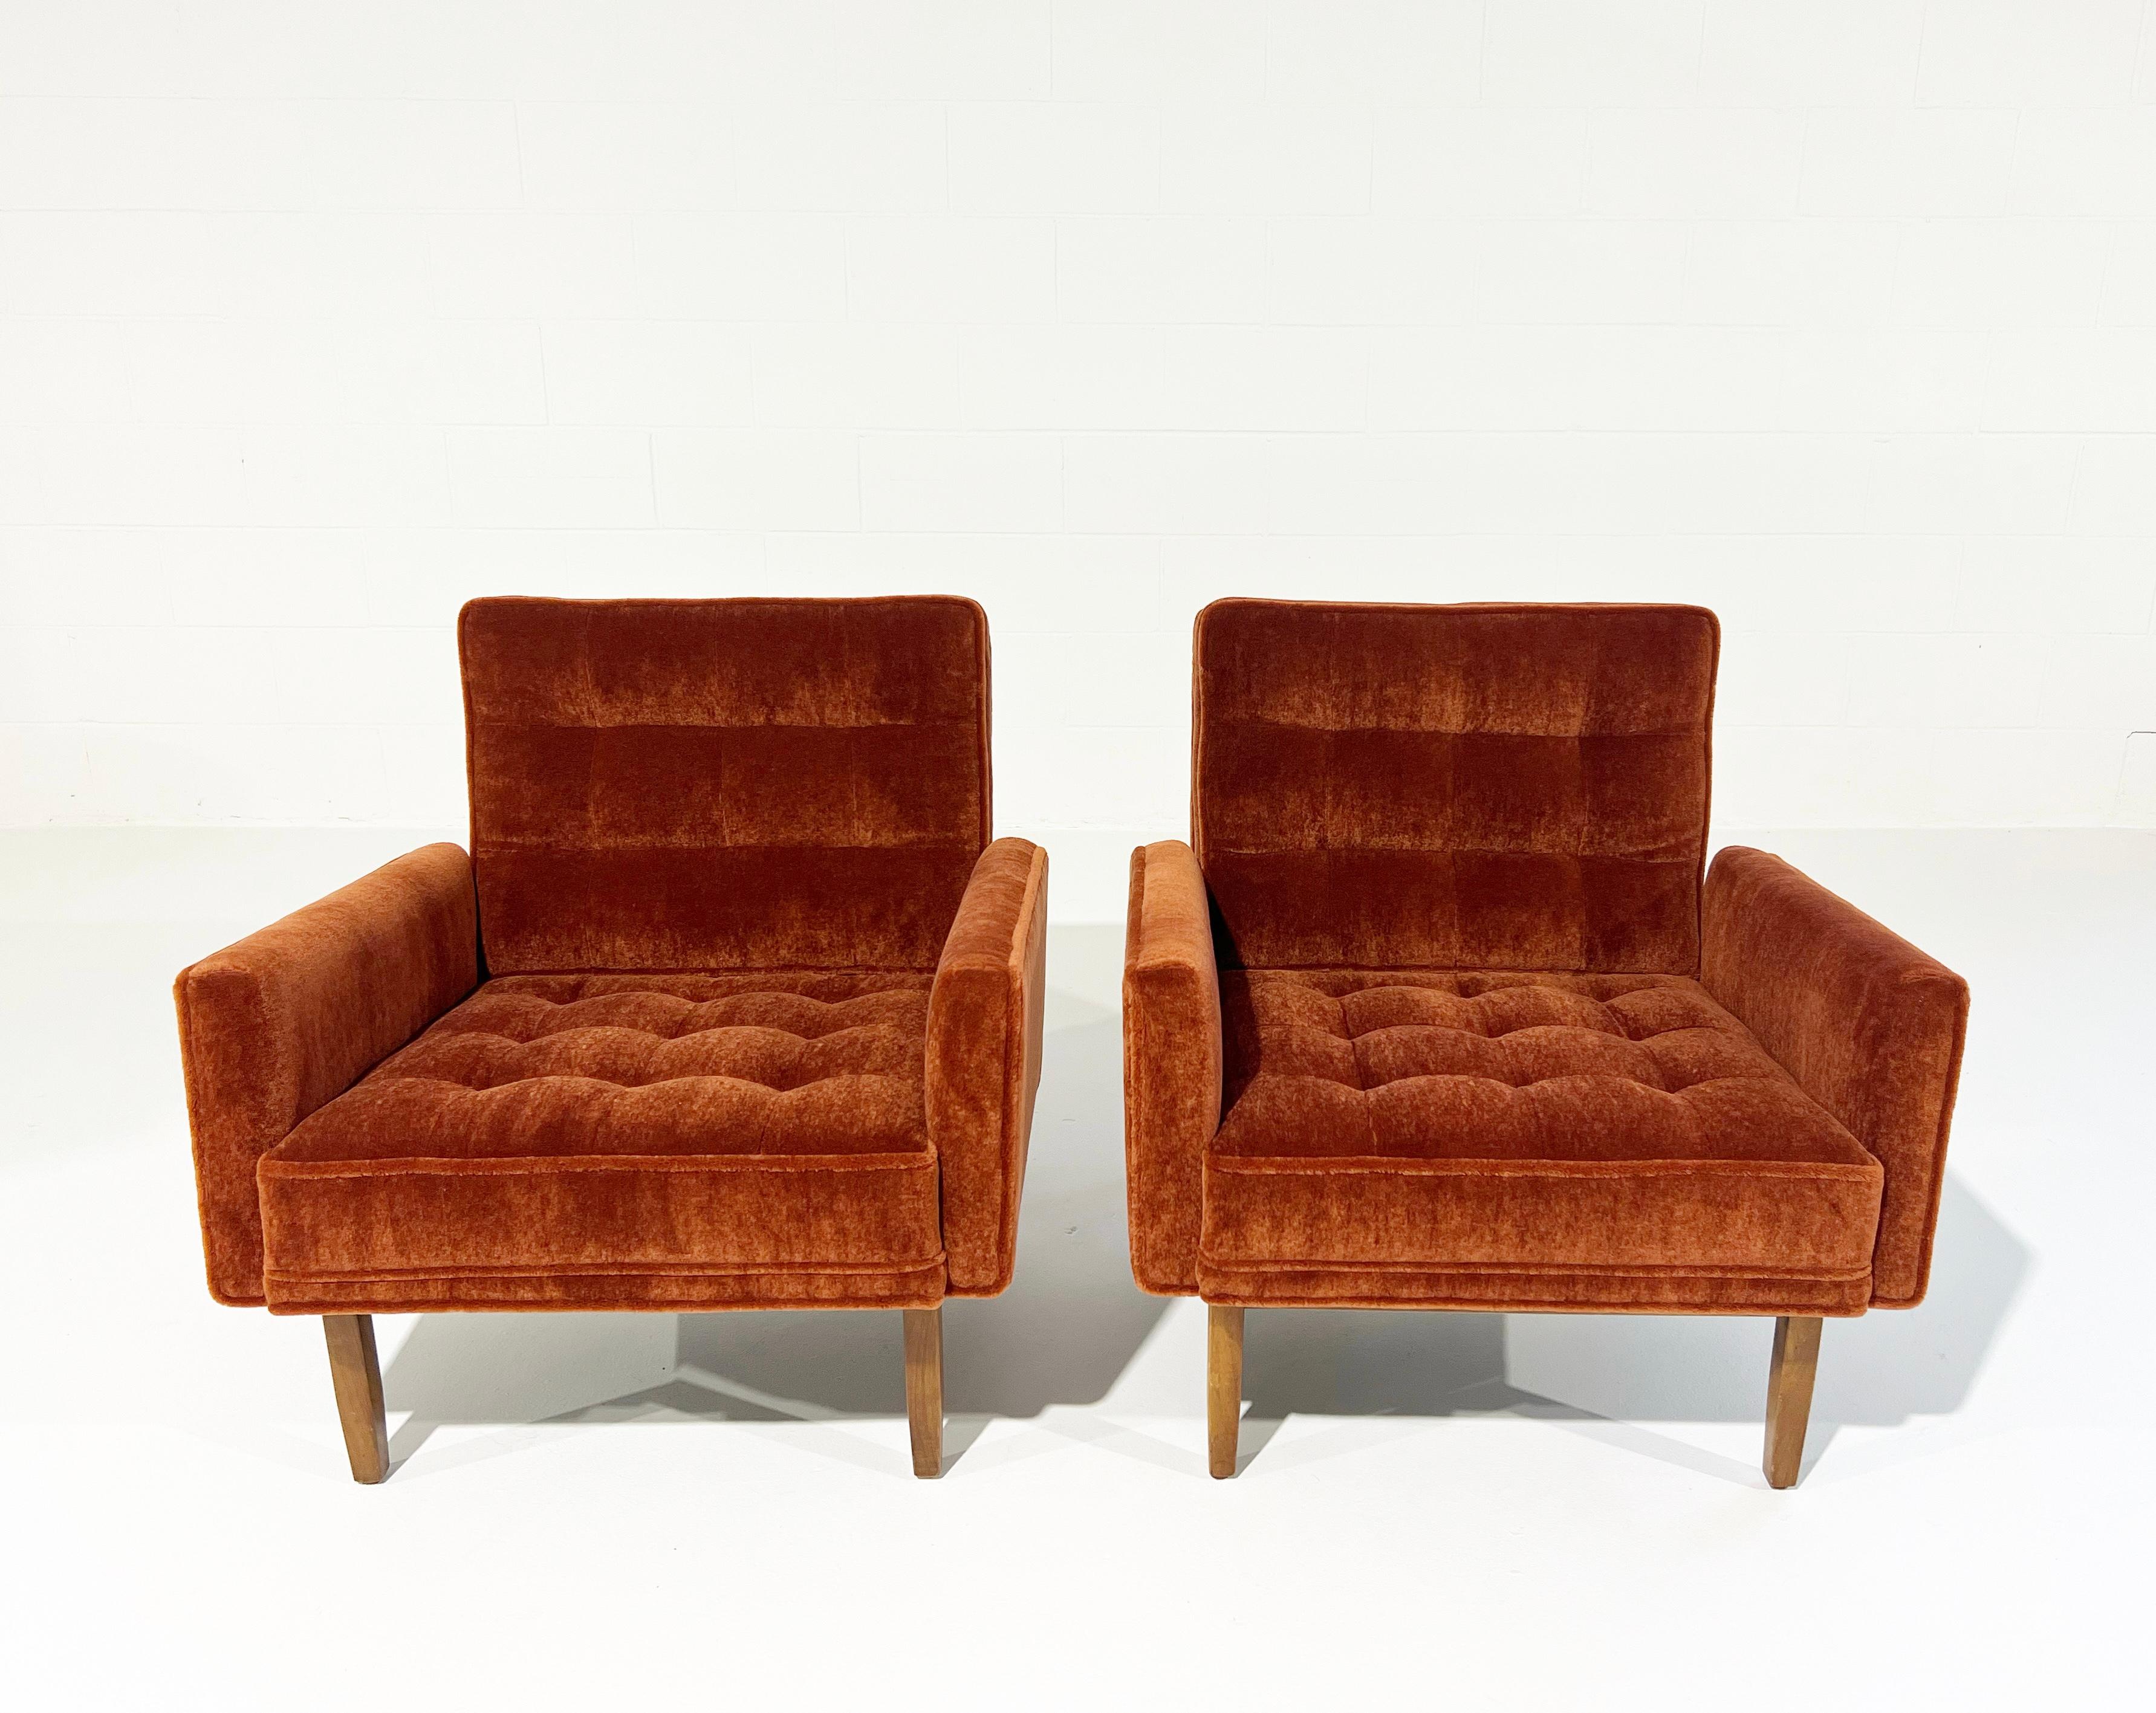 Florence Knoll Armchairs in Pierre Frey Teddy Mohair For Sale 2